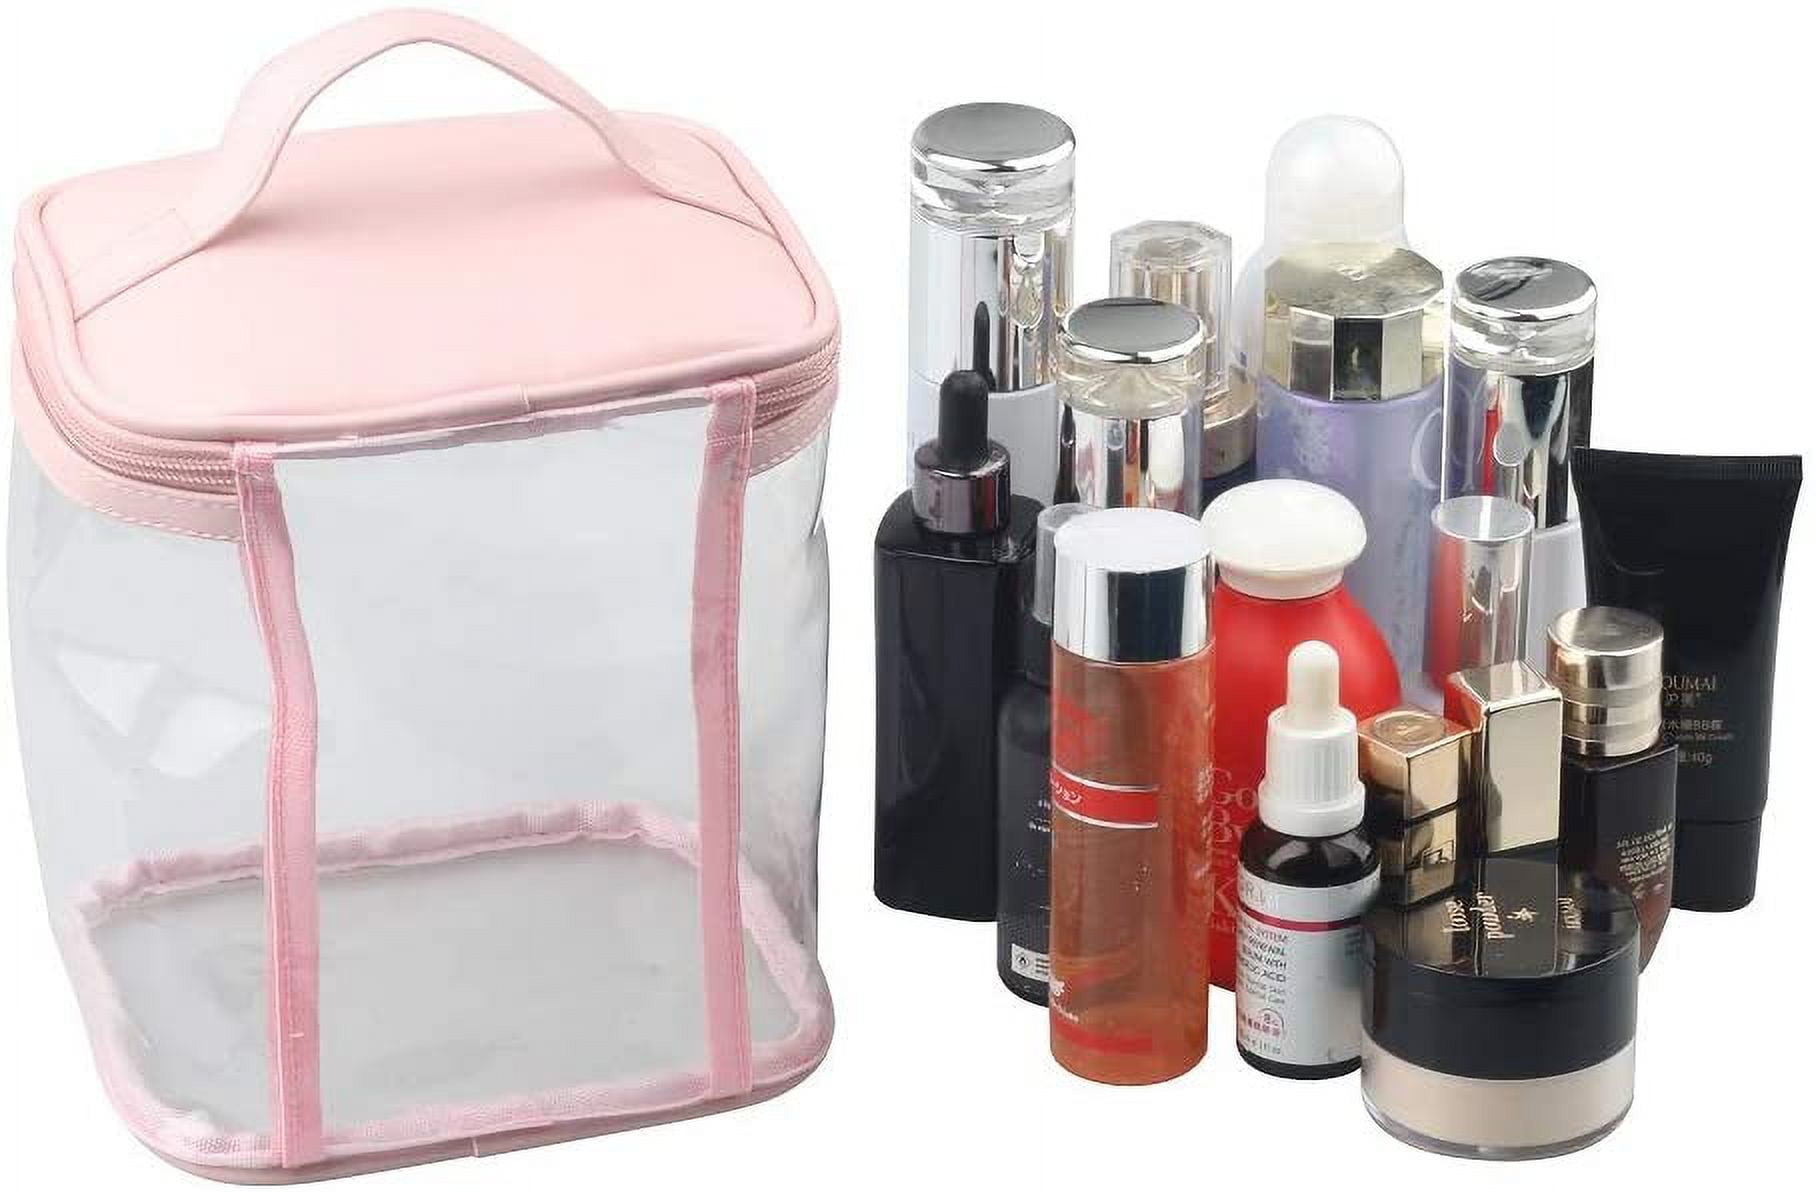 Transparent PVC Waterproof Bags Travel Organizer Clear Makeup Bag  Beautician Beauty Case Toiletry Bag Storage Diaper Pencil Pouch Wash Bags  From Nicedaily, $1.96